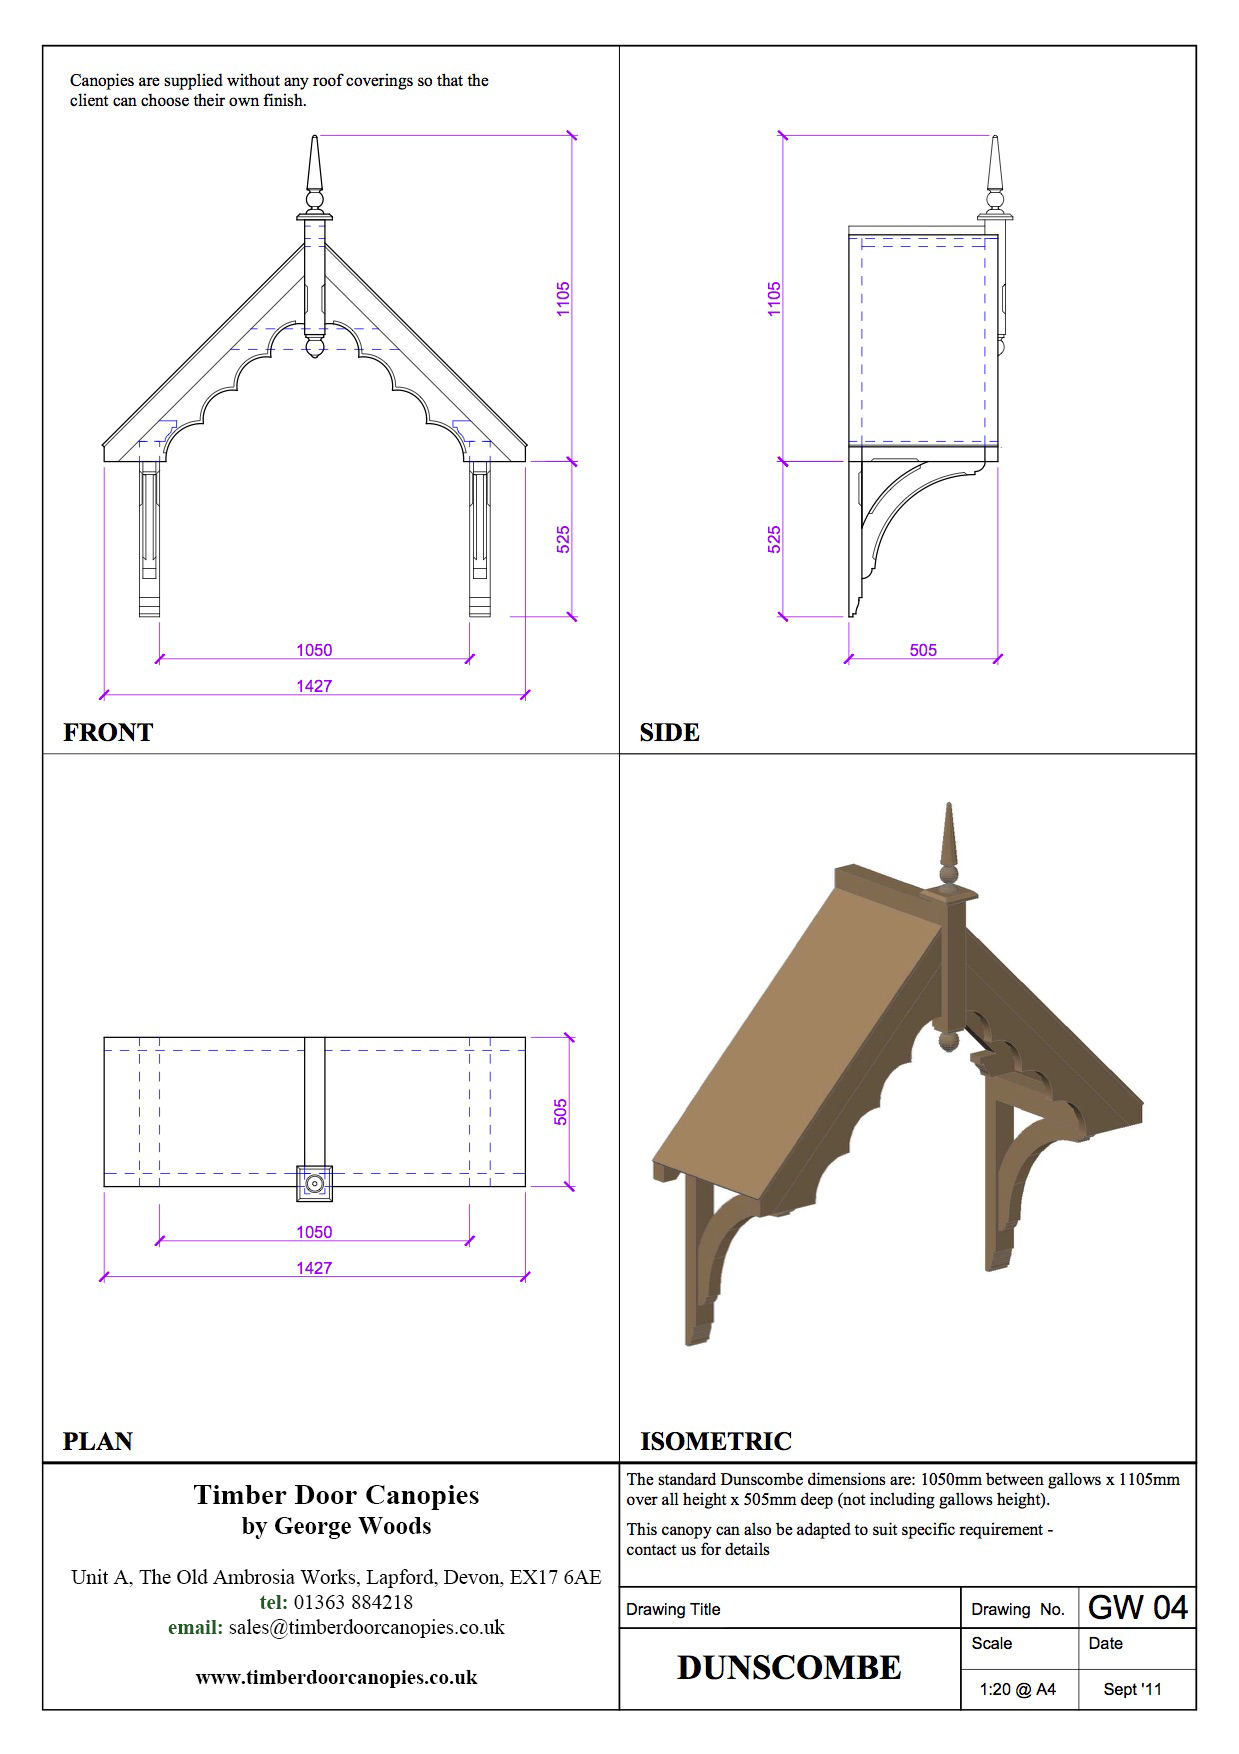 Dunscombe canopy CAD drawings